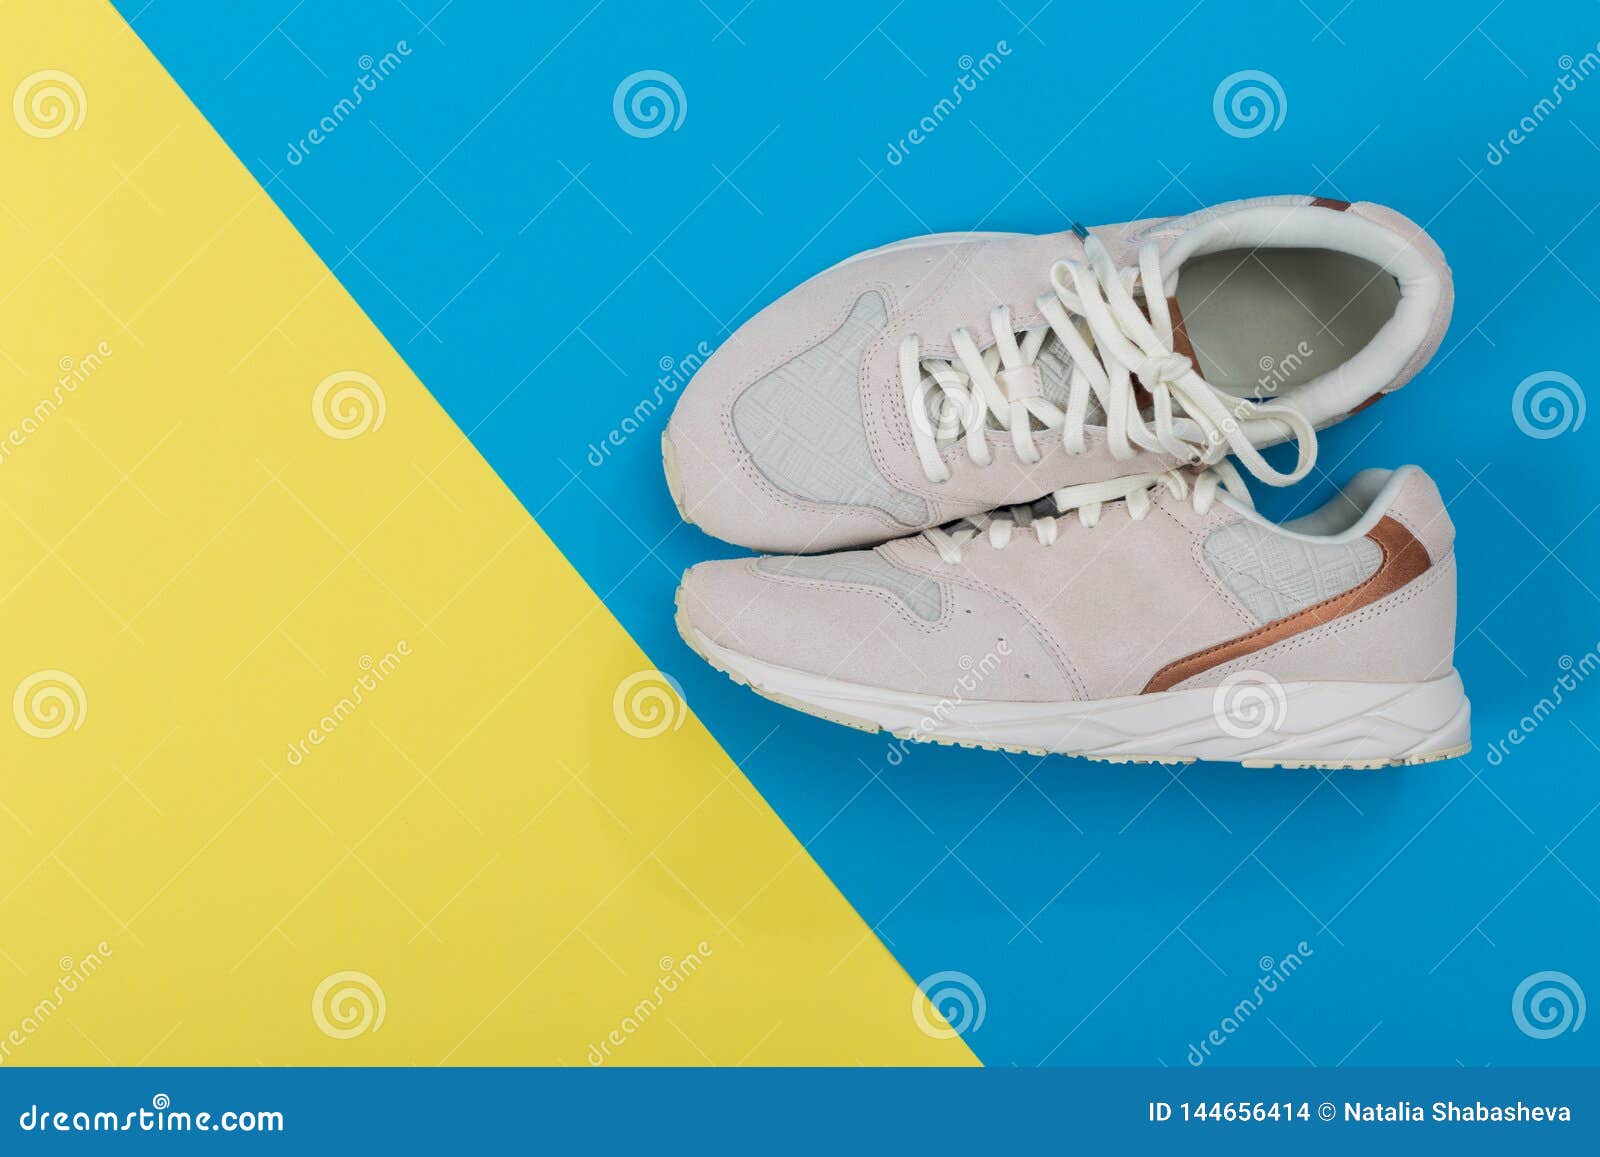 Overhead Shot of White Sneakers on Colored Background Stock Photo ...